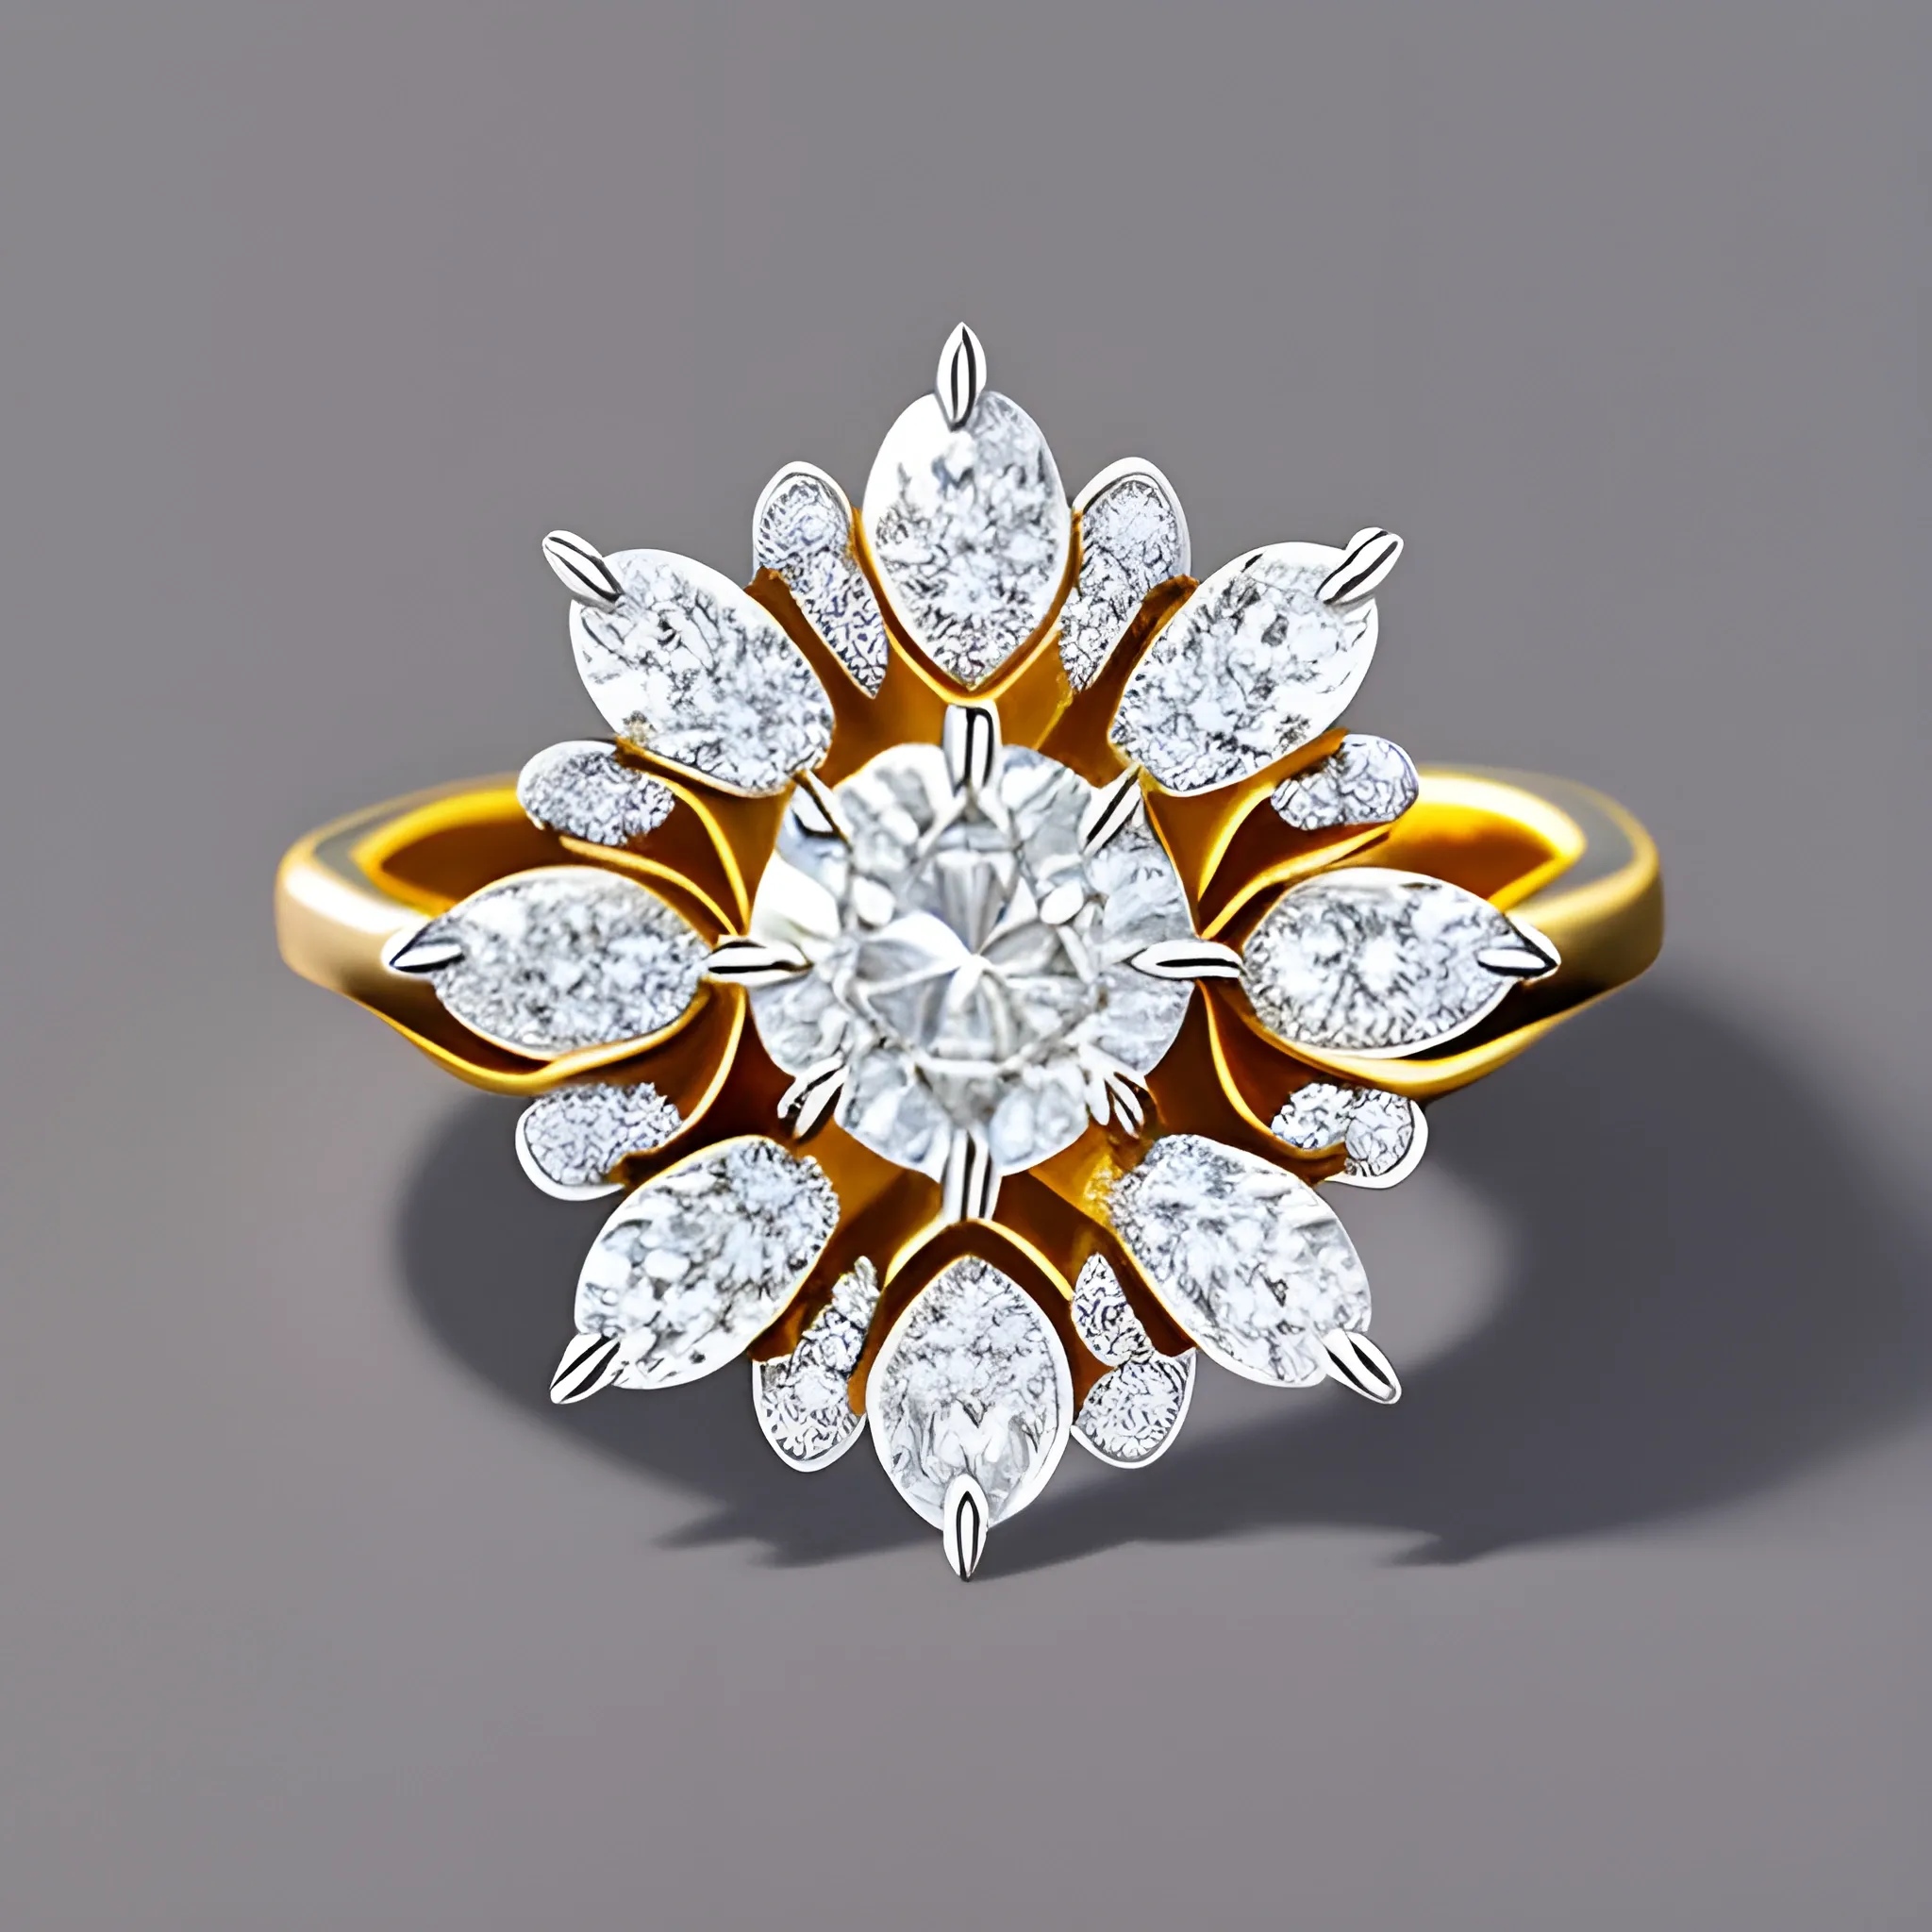 , Pencil Sketch Create a flower-shaped ring with a central white half-carat diamond surrounded by 6 drop-shaped diamonds in various shades of brown, resembling petals. The petals should be adorned with tiny gold beads, seamlessly fitting around the central brilliant.